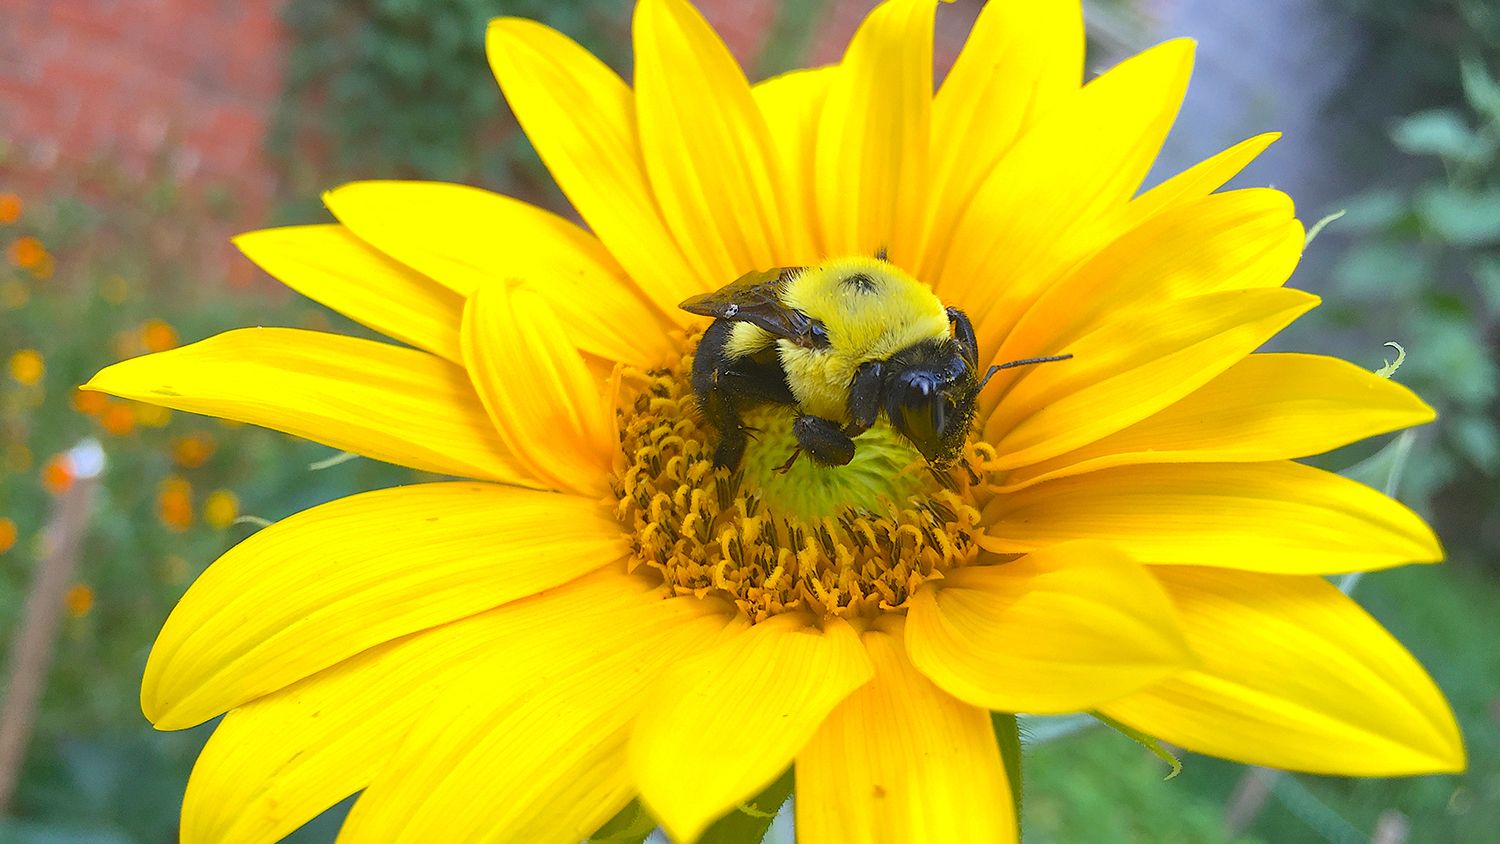 Sunflower research shows aid to bees